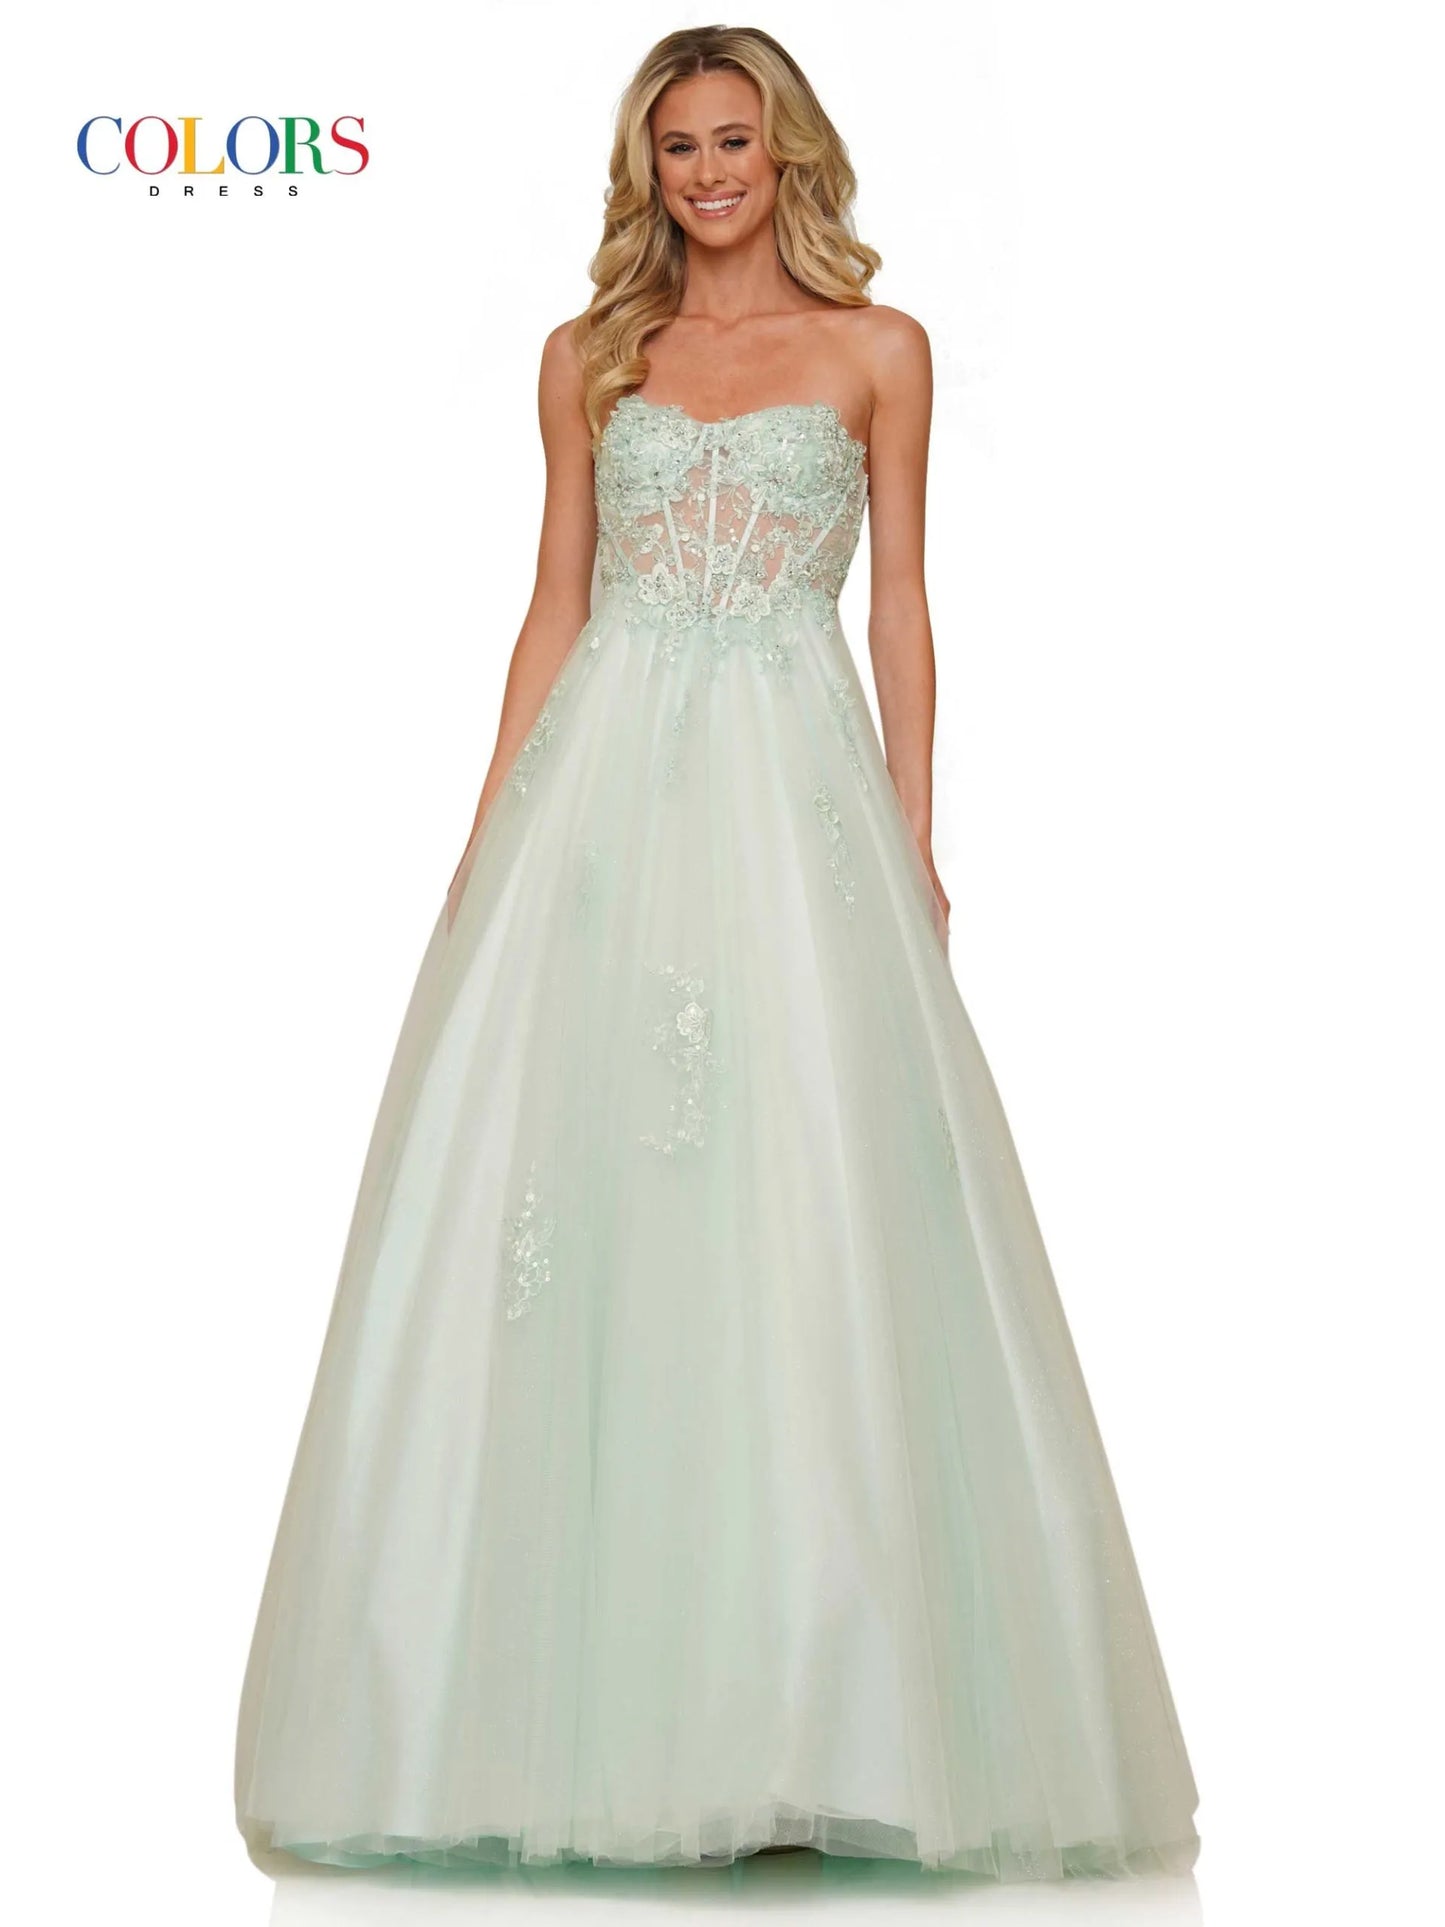 Elevate your formal look with the Colors Dress 2898 Long Prom Dress. This A-line gown features a corset bodice for a flattering fit, while the tulle and lace applique add a touch of elegance. Perfect for prom or pageants, this dress will make you stand out in style.